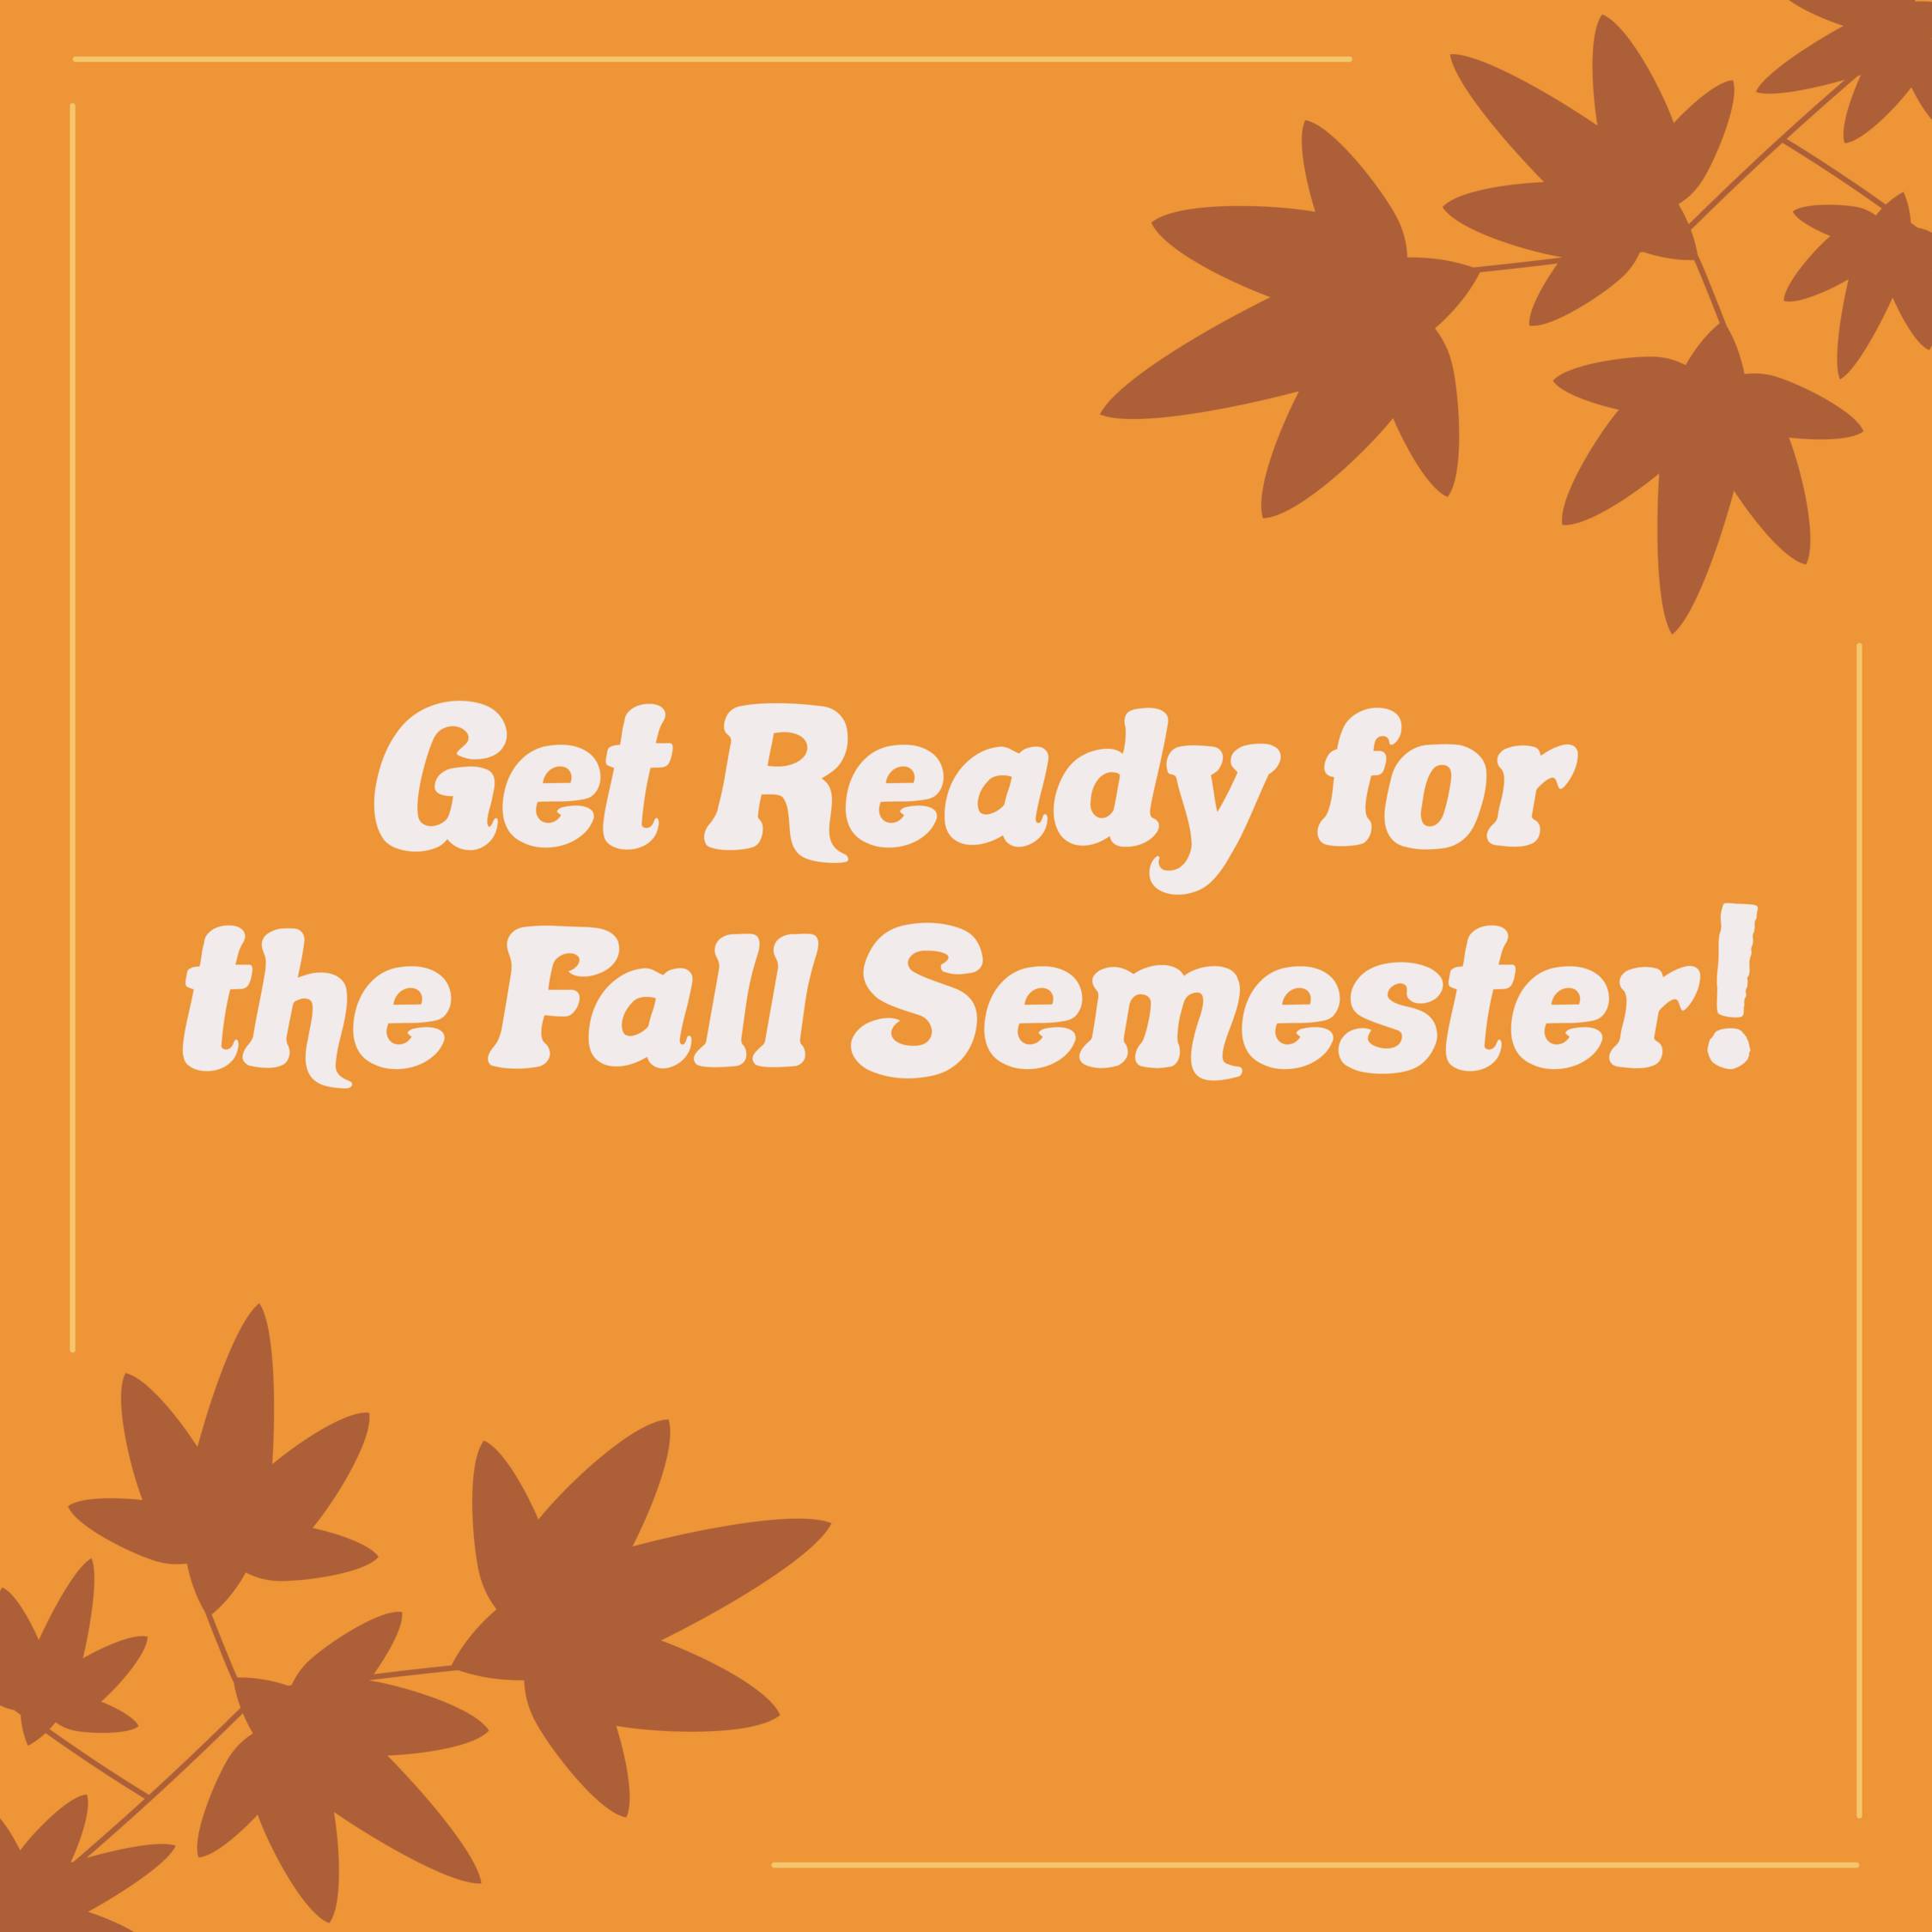 Get Ready For the Fall Semester!